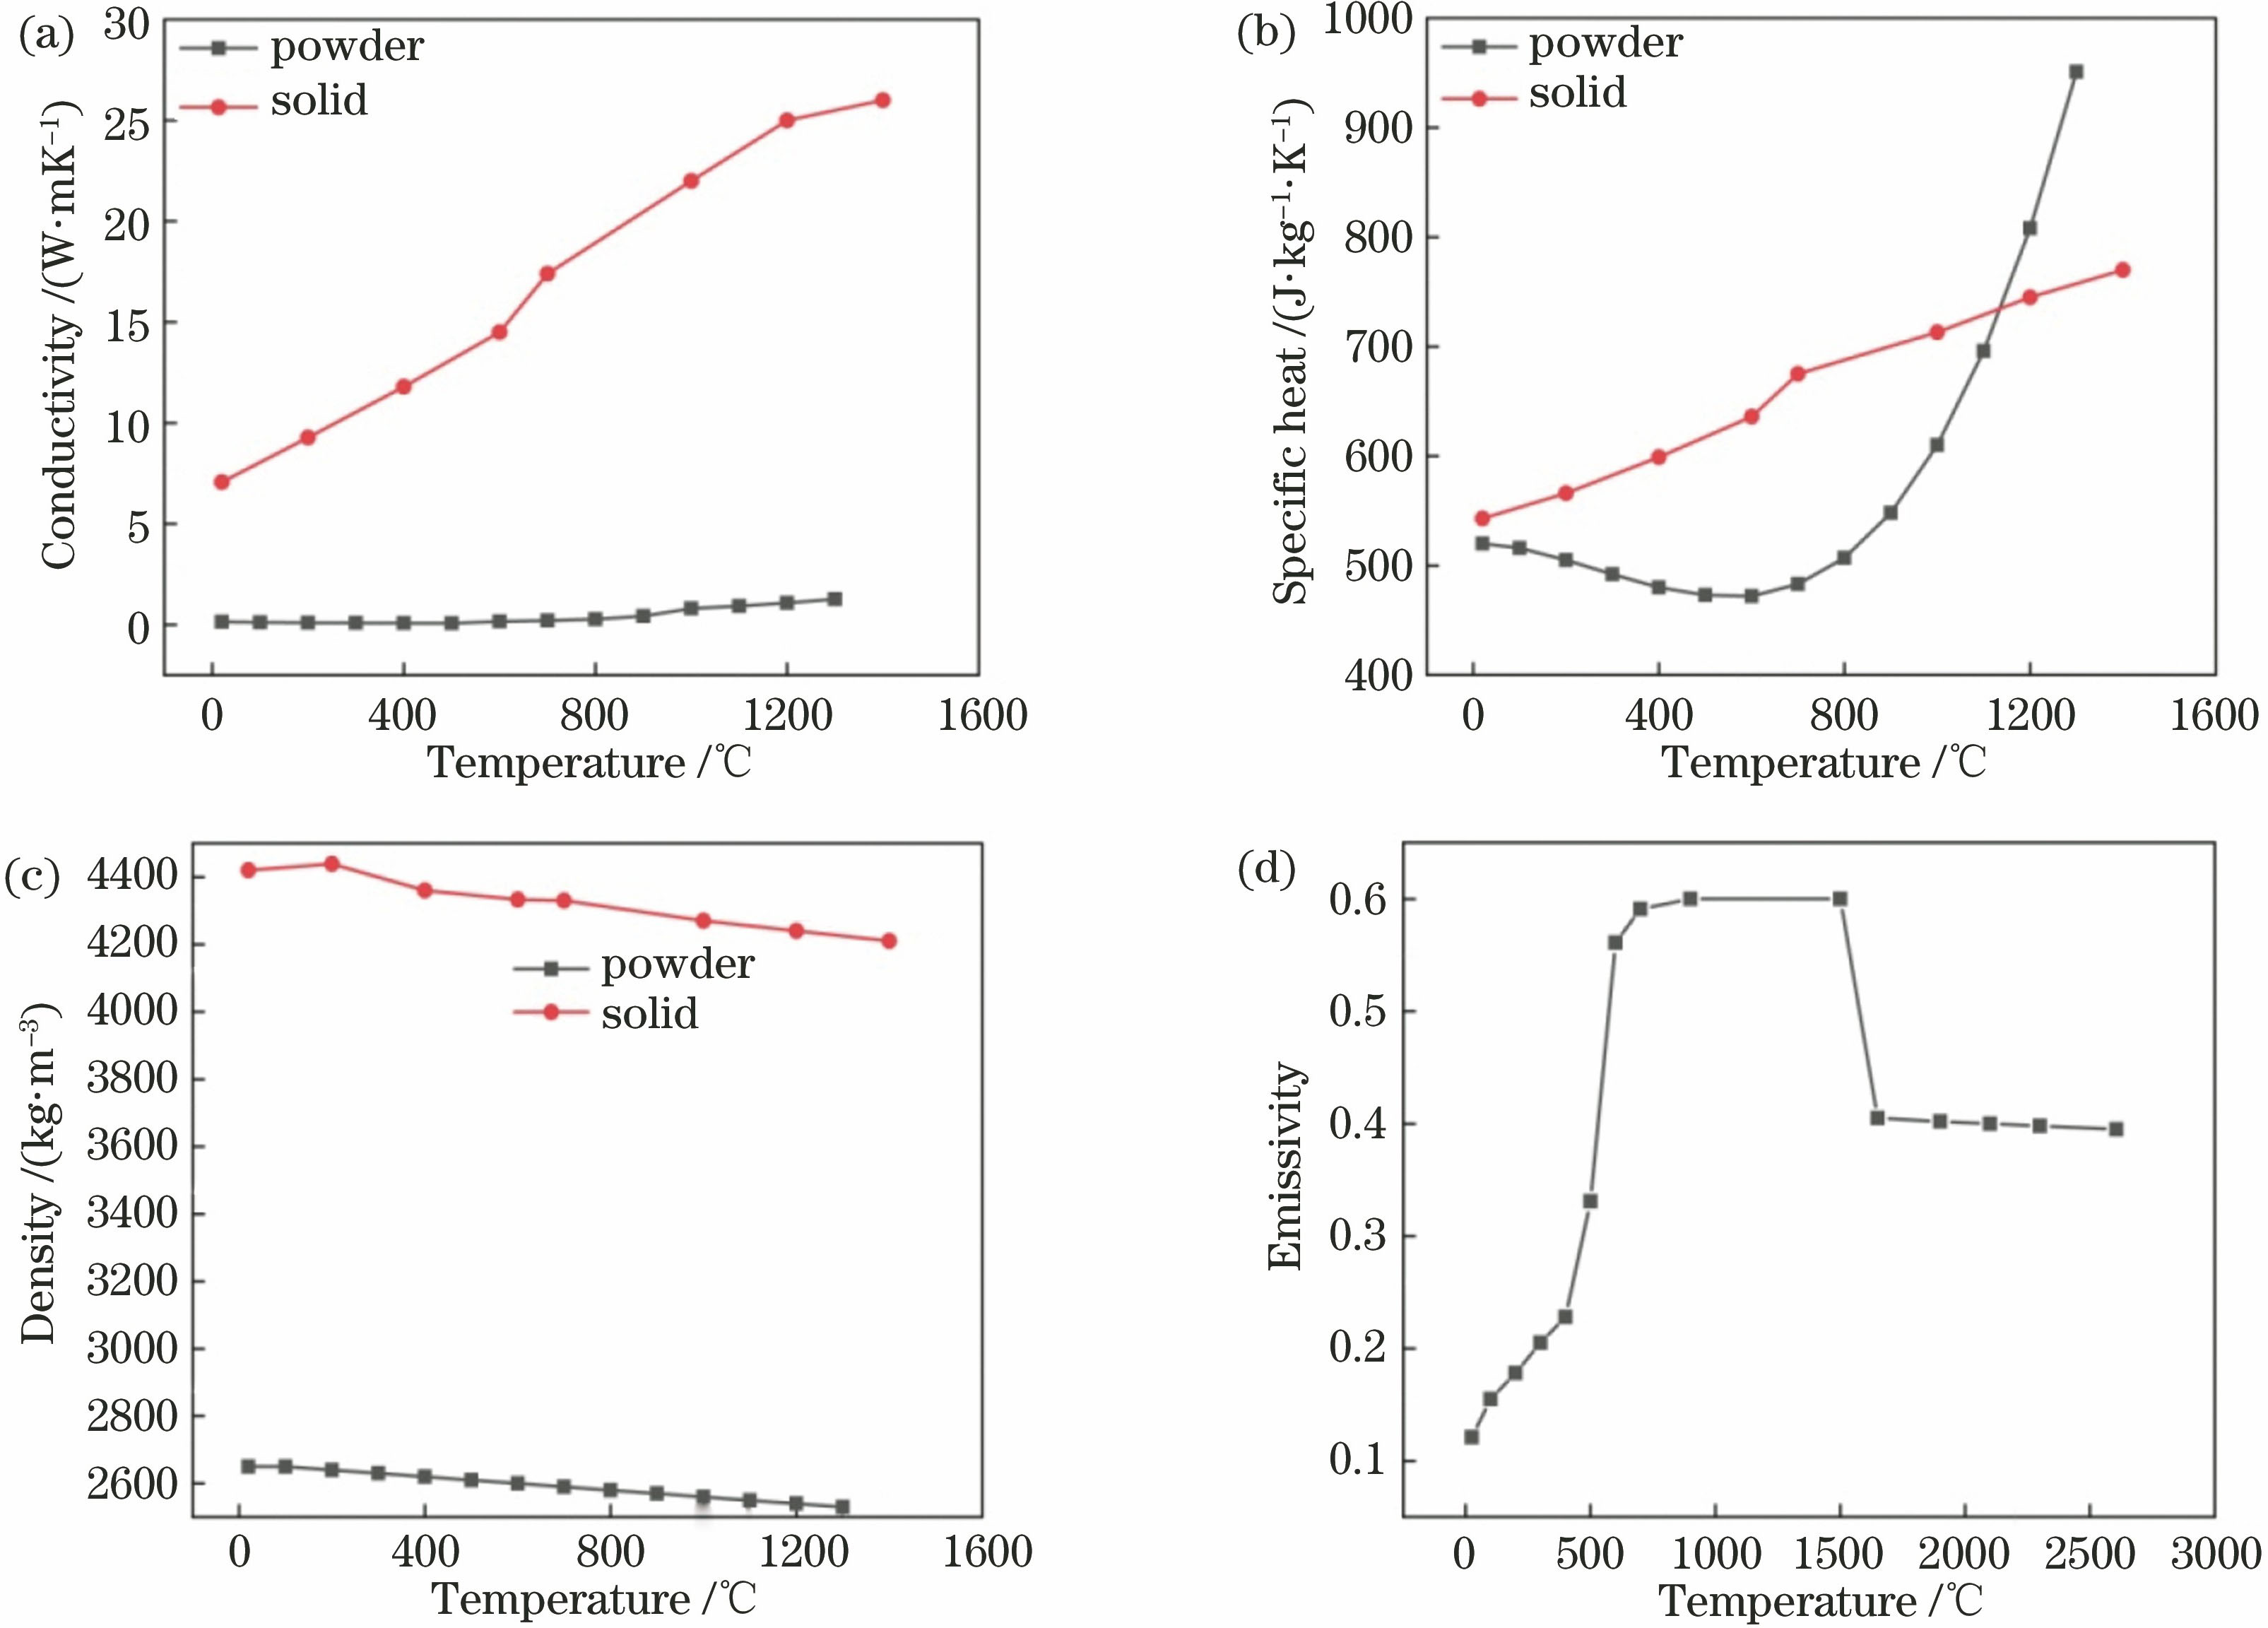 Parameters of thermophysical properties for Ti6Al4V at different temperatures. (a) Conductivity; (b) specific heat; (c) density; (d) emissivity